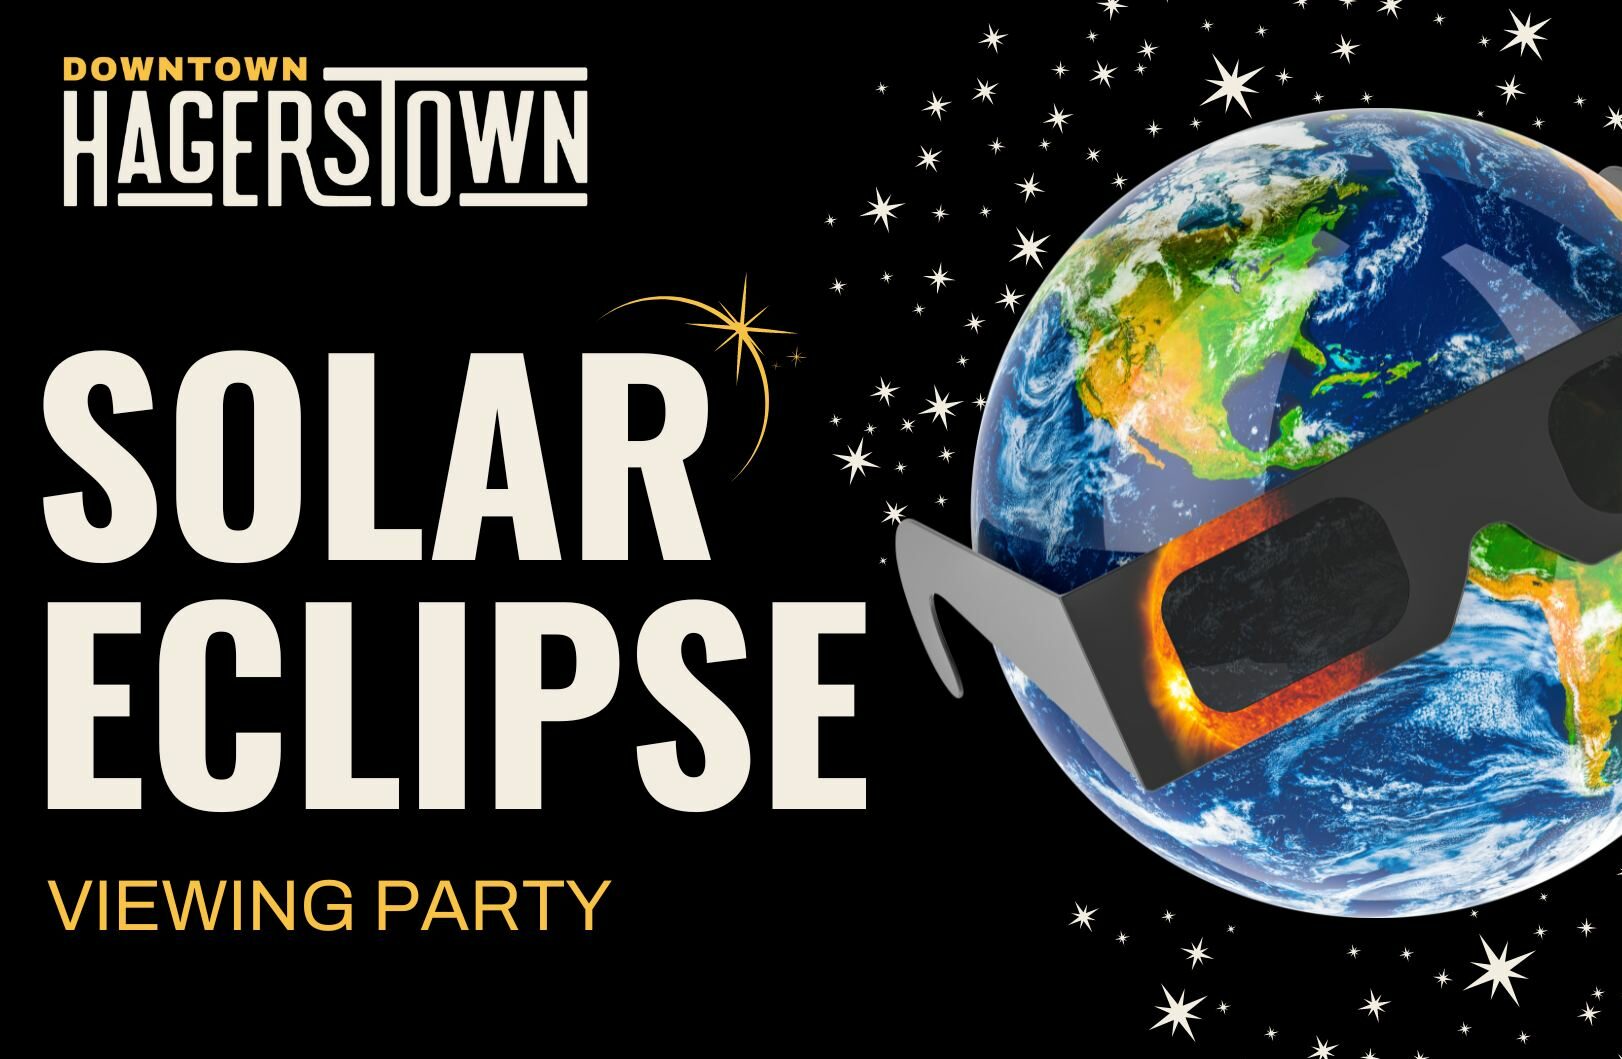 <h1 class="tribe-events-single-event-title">Ryan Hosts the Downtown Hagerstown Solar Eclipse Viewing Party</h1>